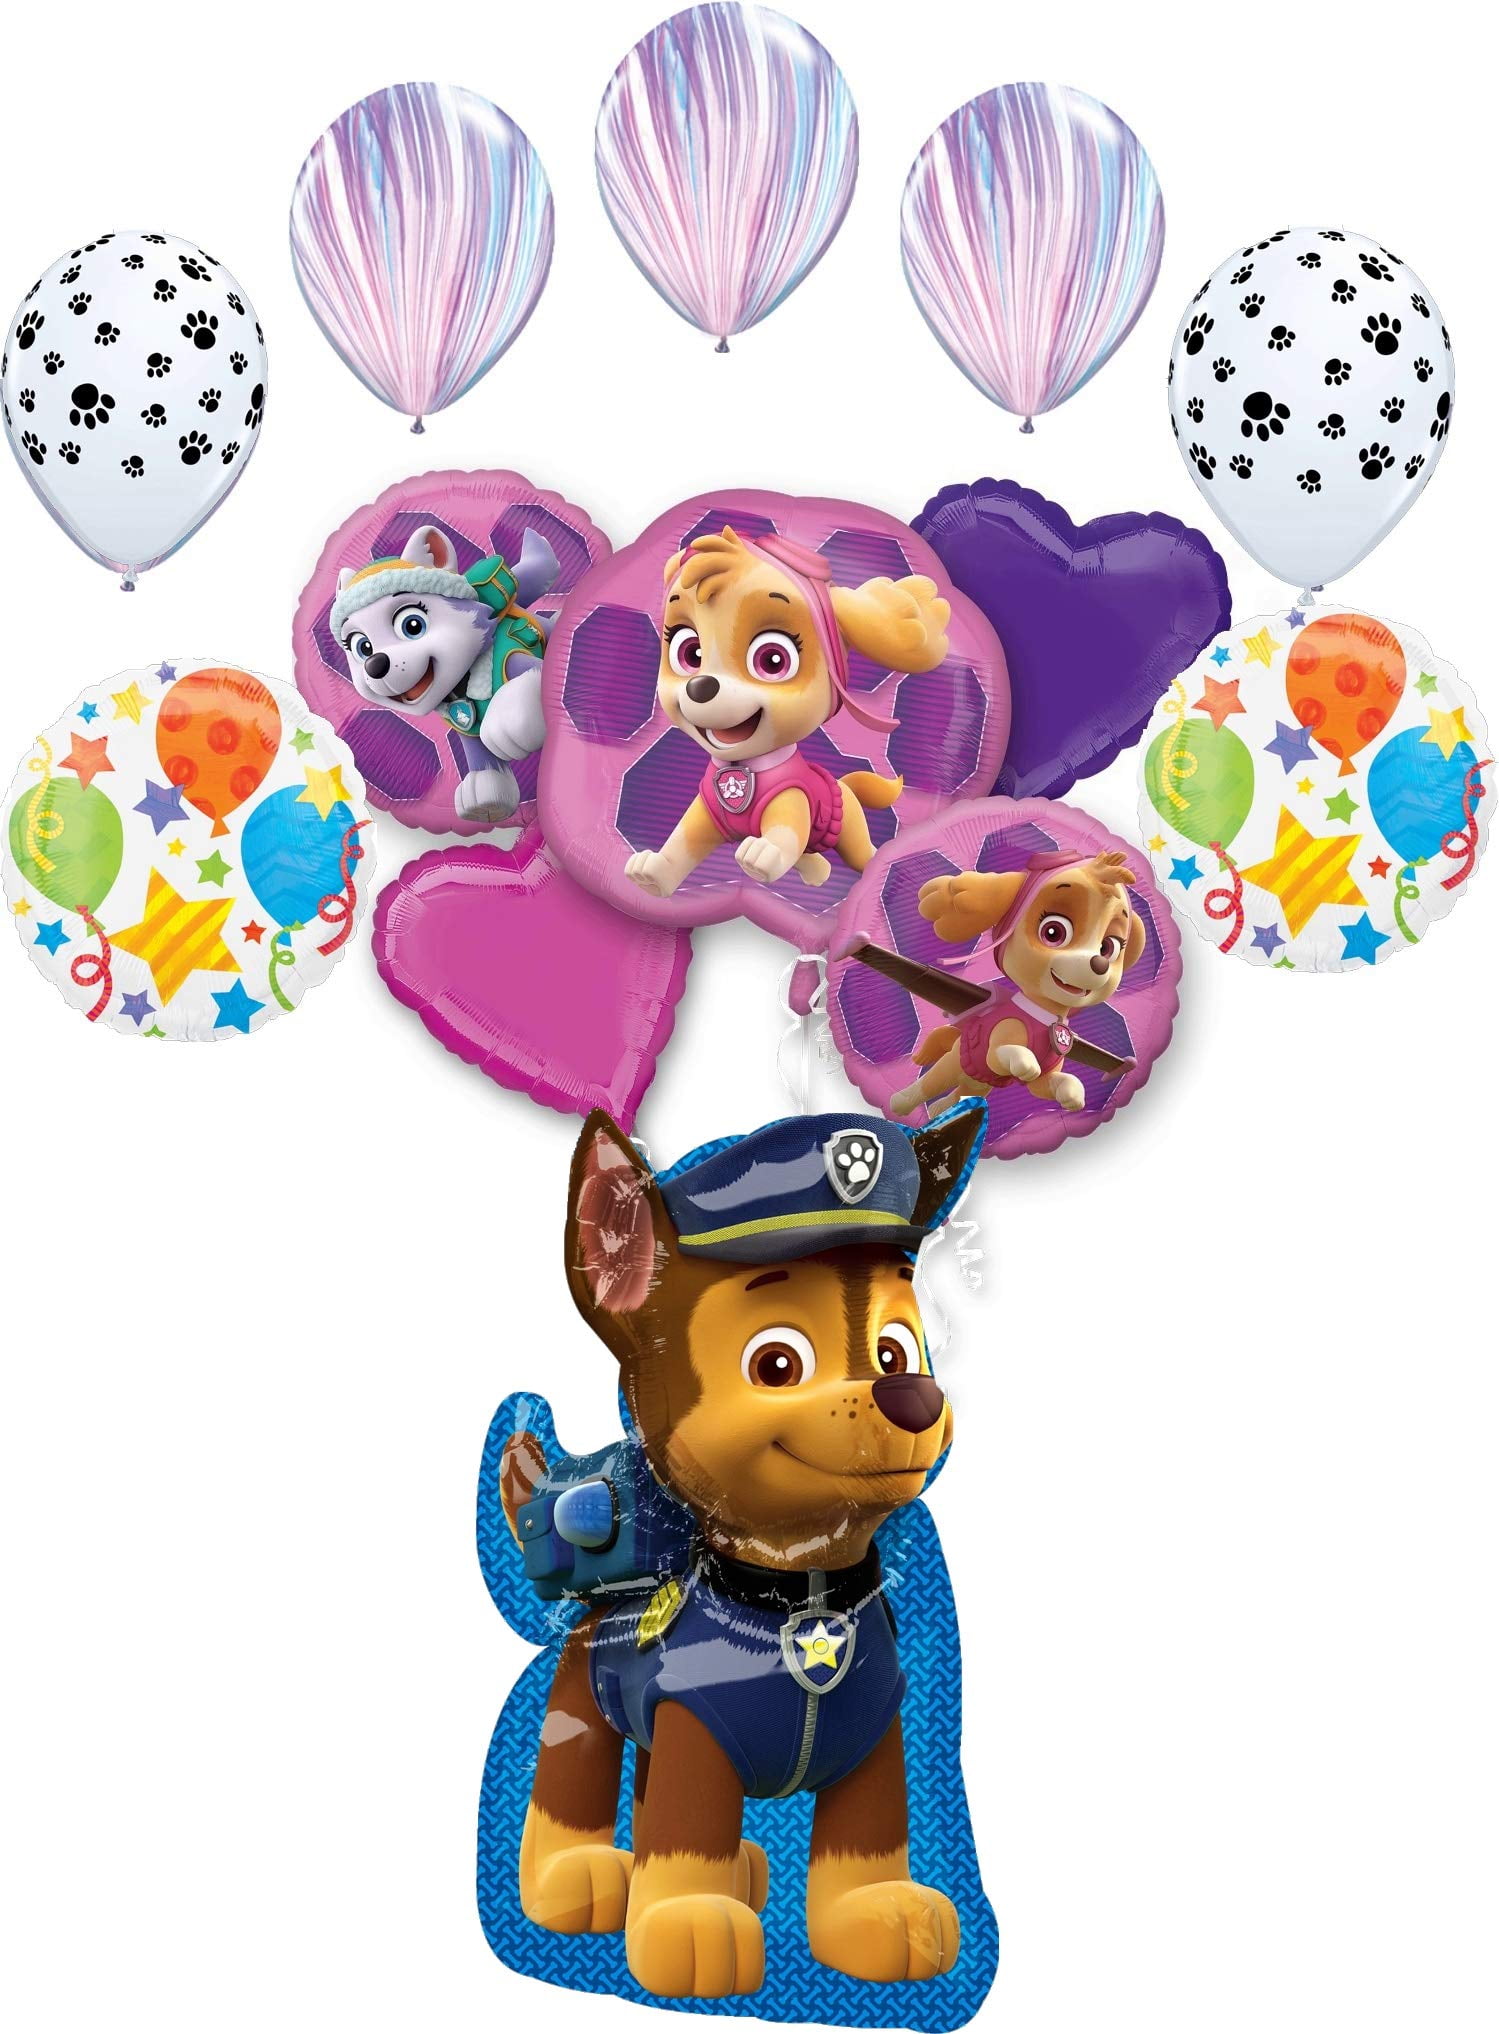 18/" FOIL BALLOON TABLE DECORATION SKYE EVEREST AIR FILL ONLY PAW PATROL